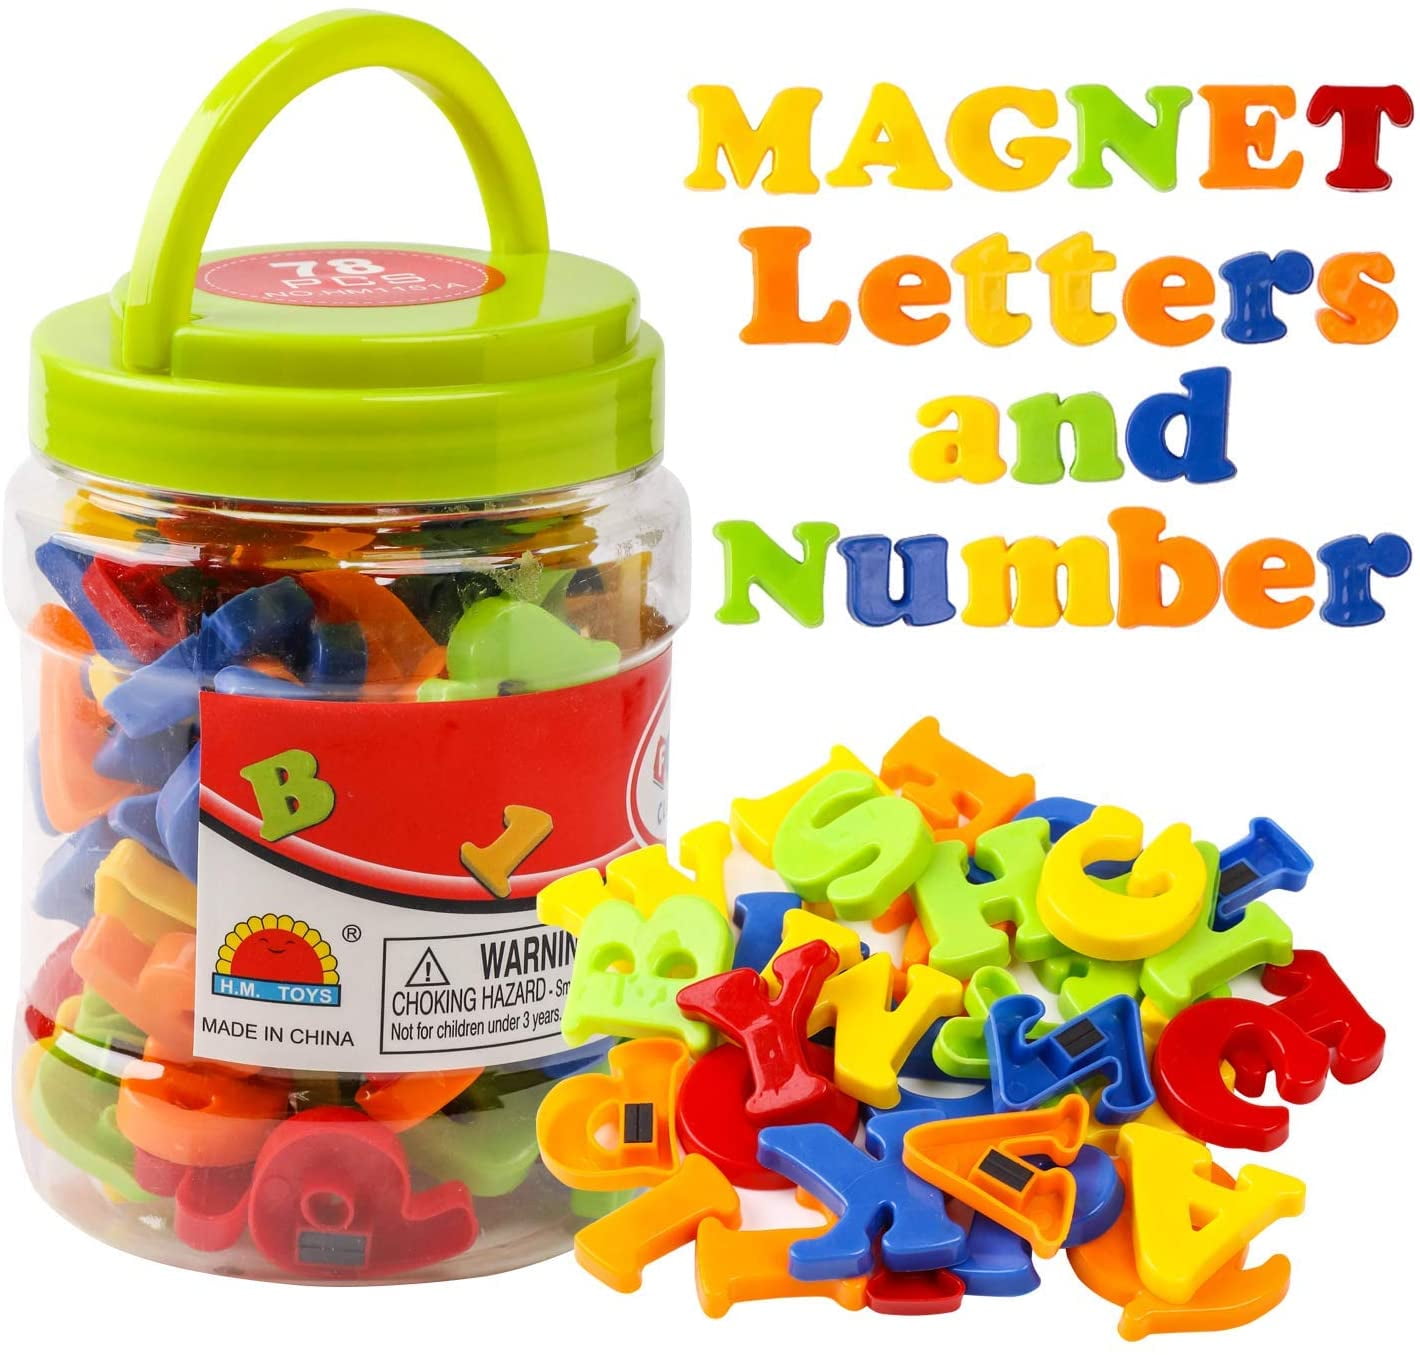 2x Magnetic Letter Number Fridge Magnet Alphabet Math Counting Education Toy 